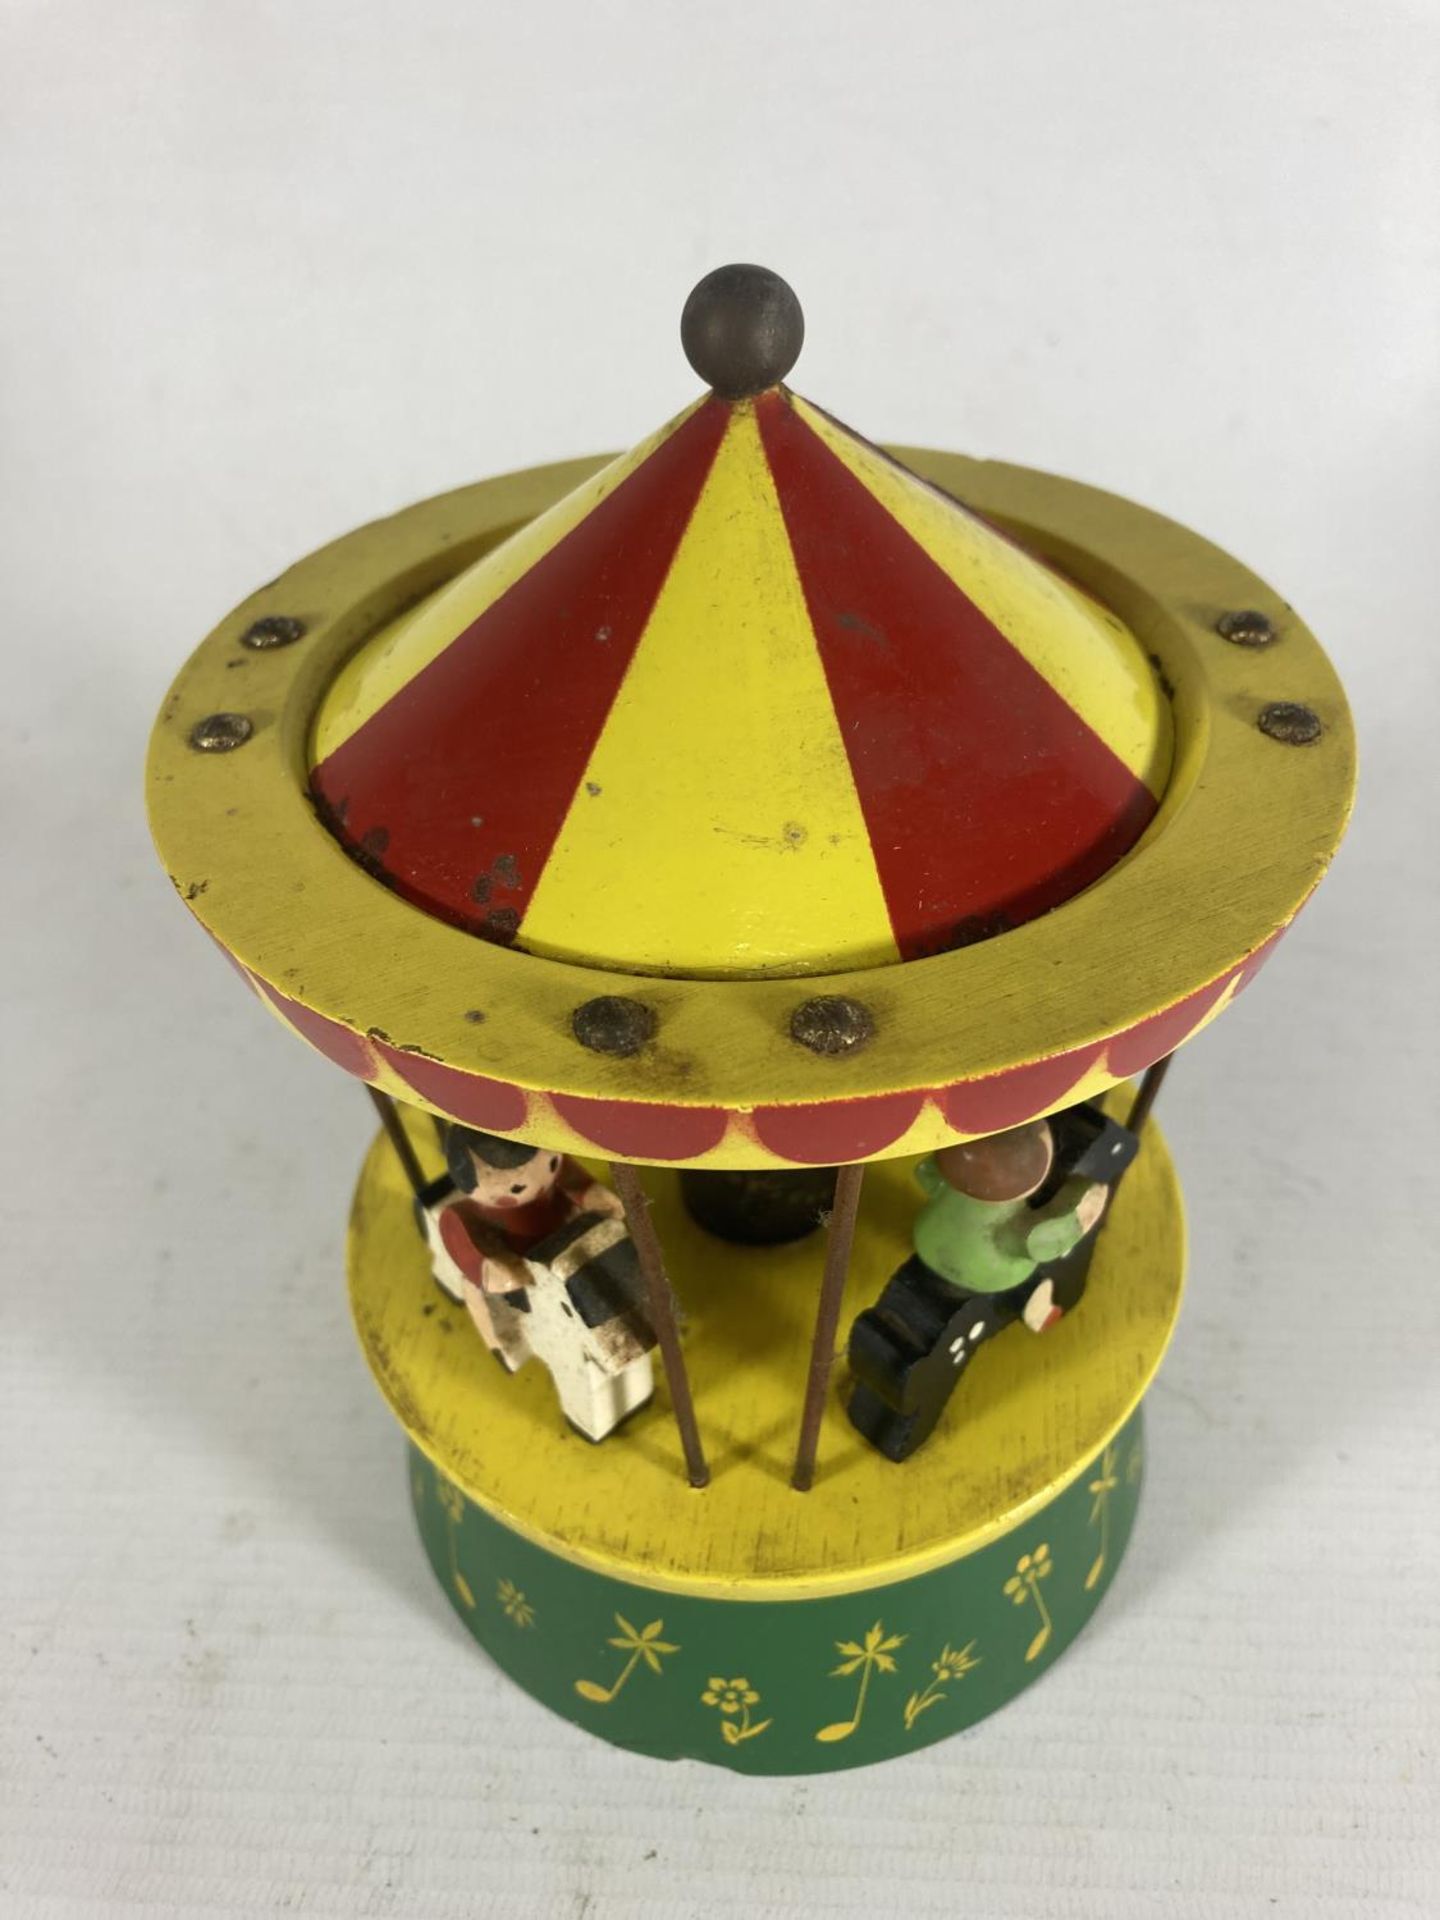 A RARE VINTAGE REUGE WODDEN MERRY-GO-ROUND WITH SWISS MUSICAL MOVEMENT - Image 3 of 4